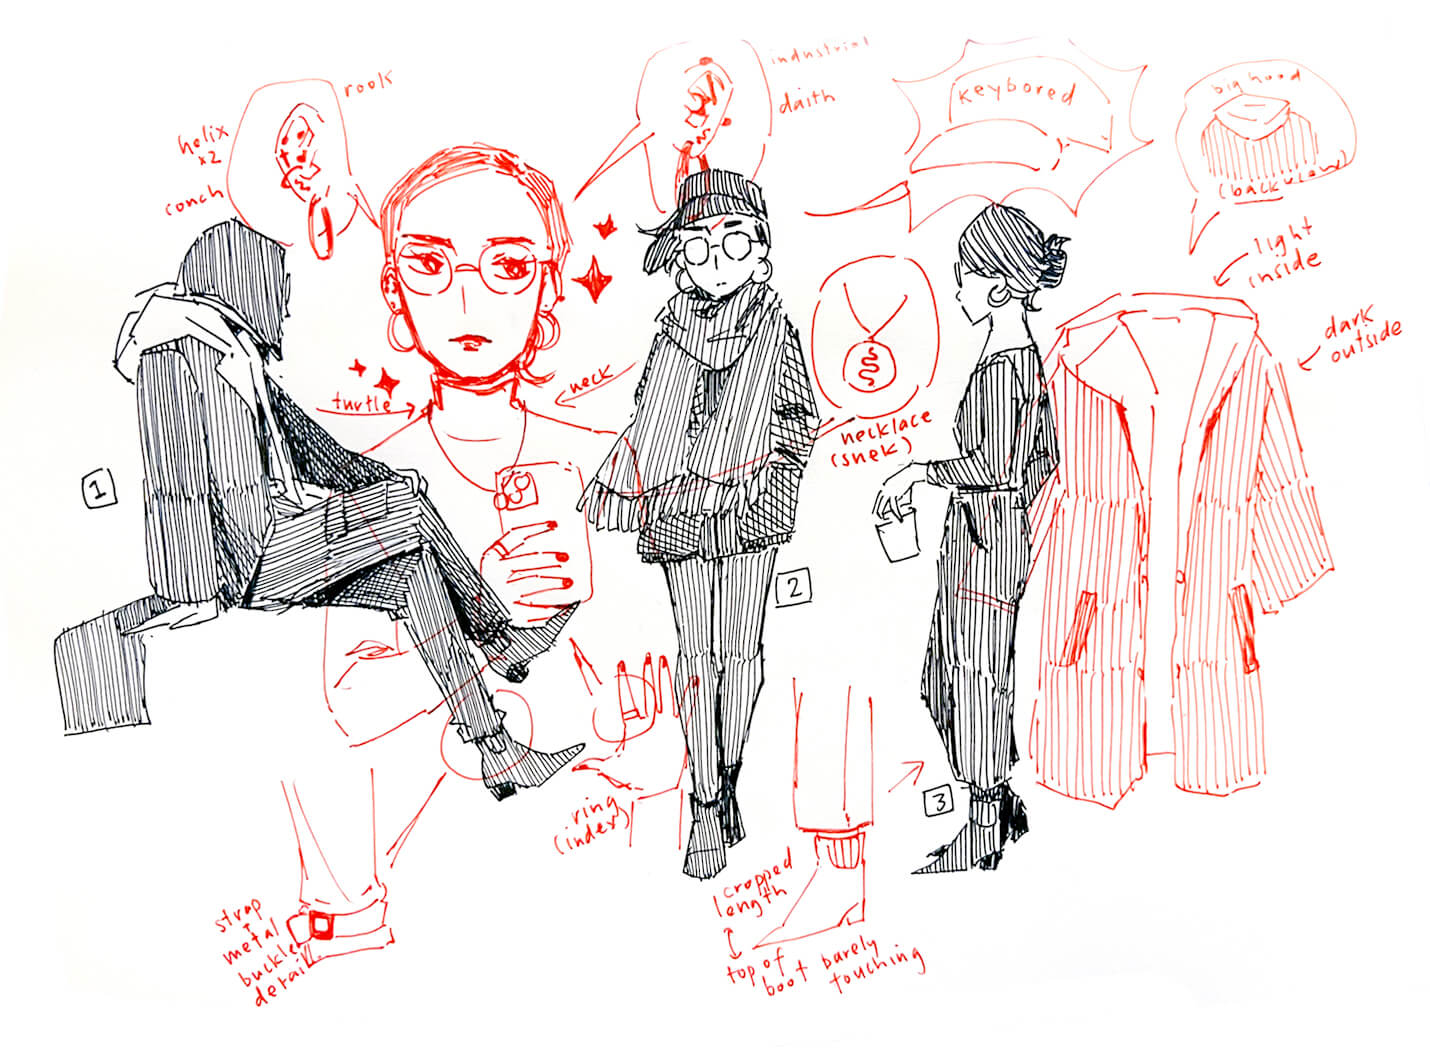 Sketches of myself: wearing a long coat and pants; a cap, big scarf, and short coat; cropped pants and plain top, holding coffee. All outfits are black. Overlapping sketches show closeups like jewelry and clothing details.